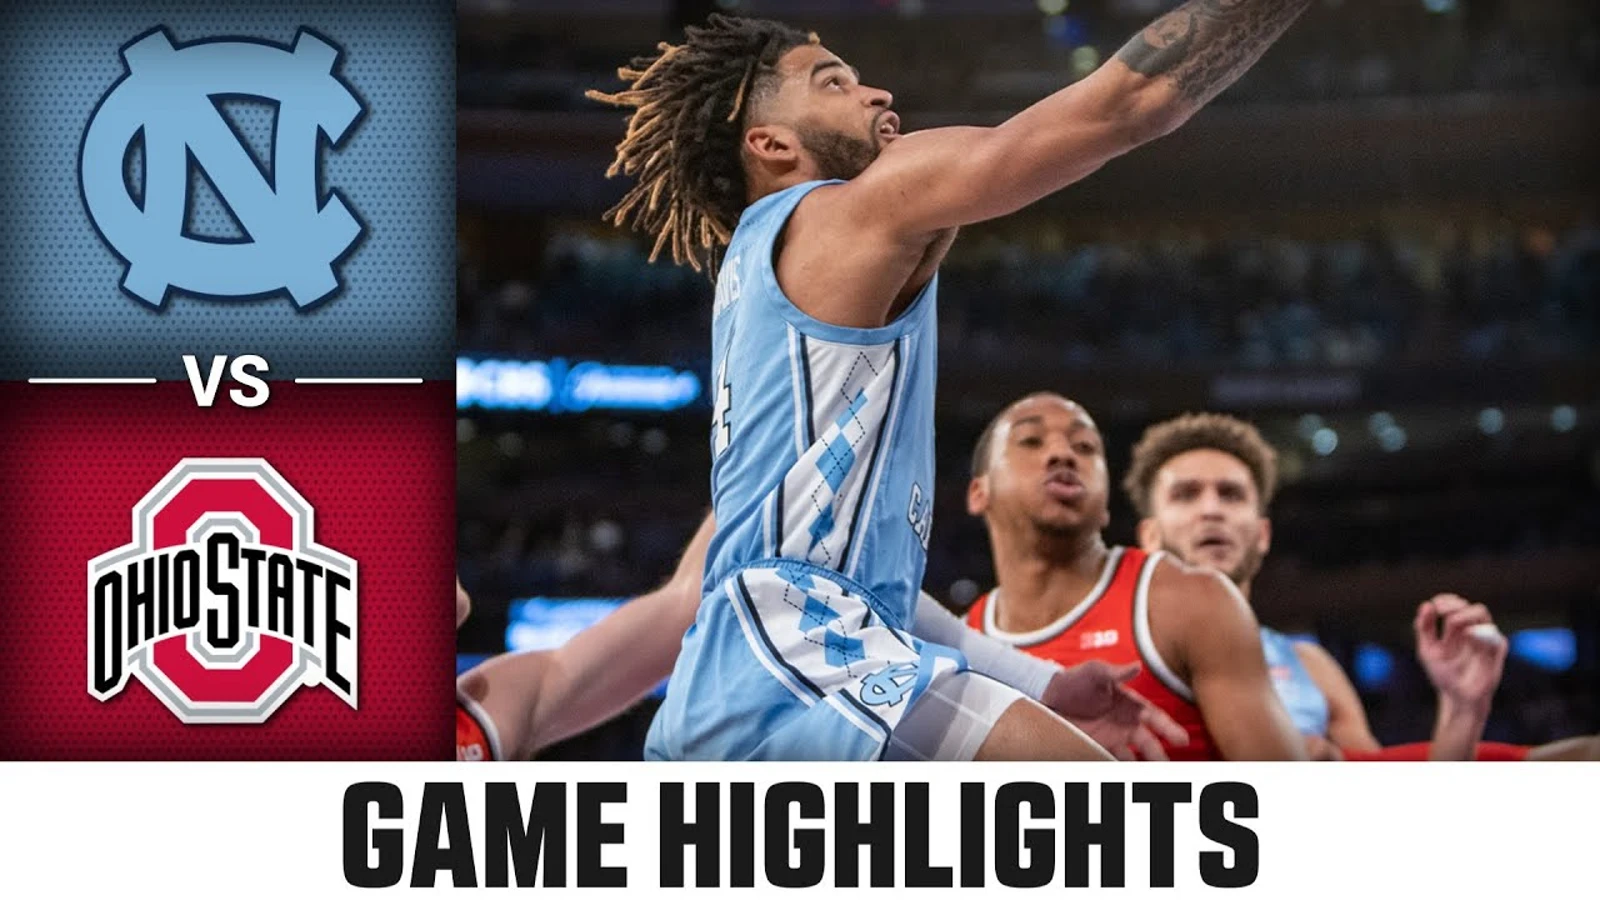 North Carolina outlasts No. 23 Ohio State in overtime thriller, final score 89-84